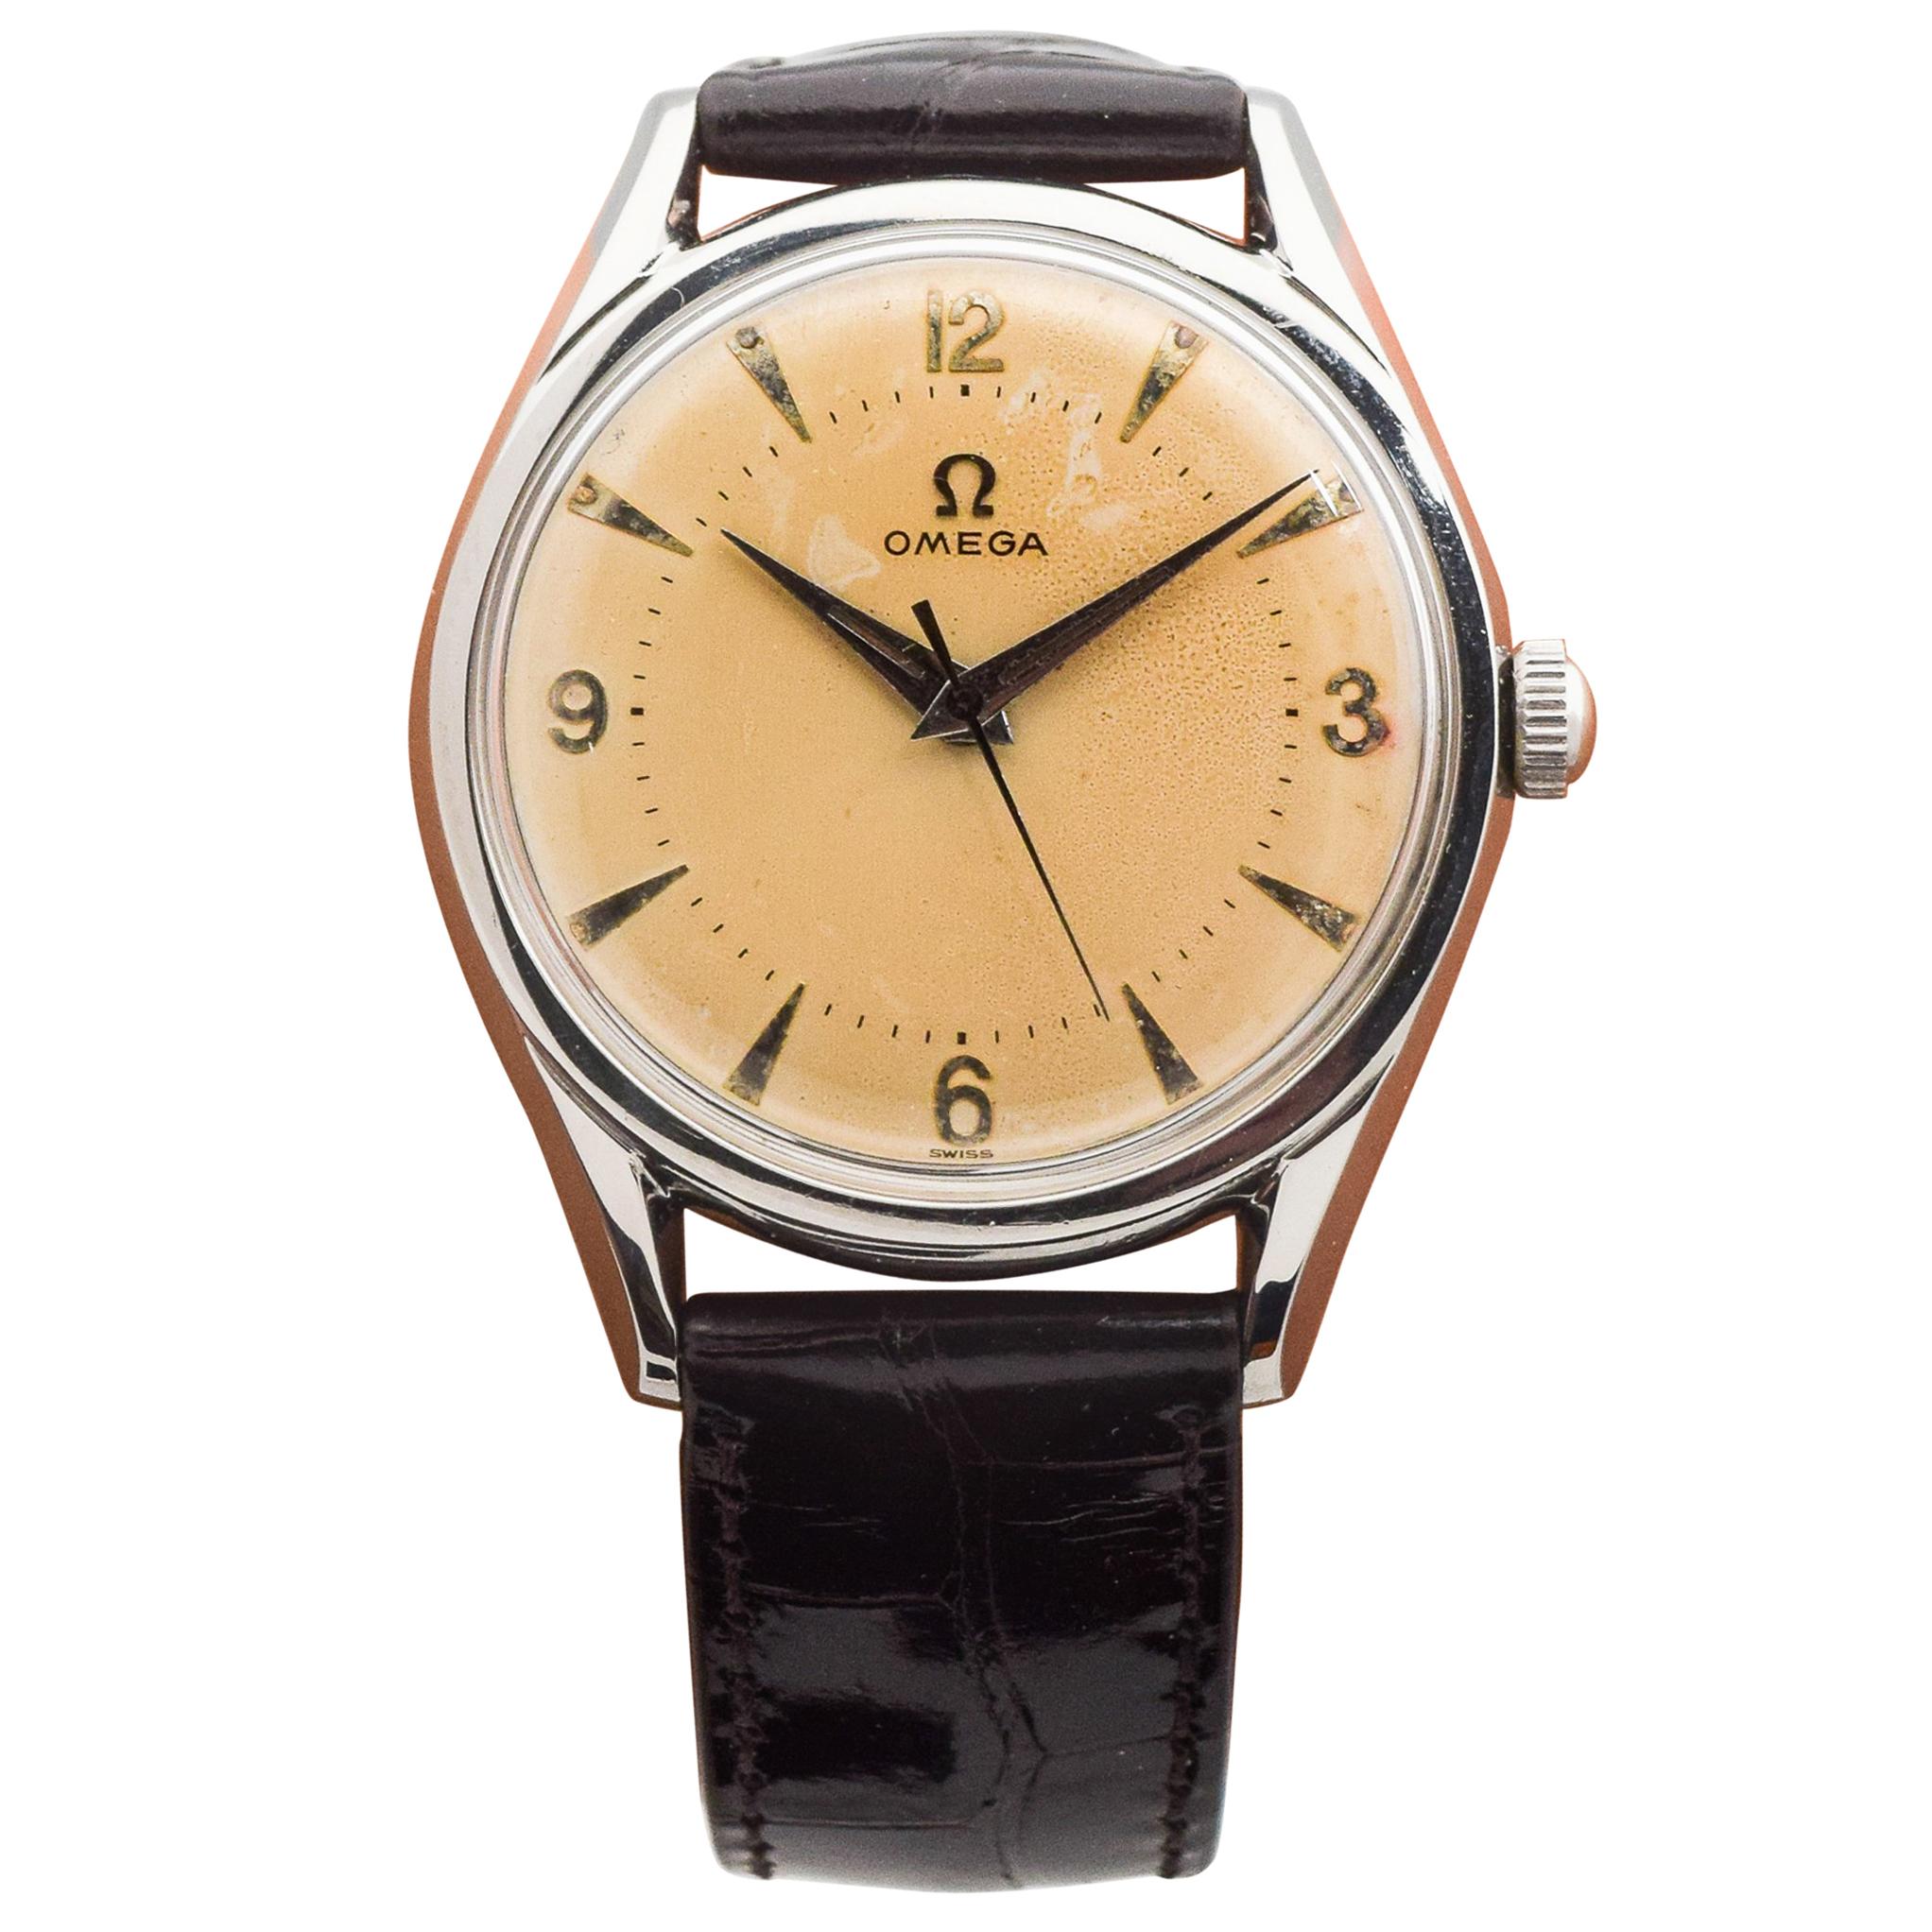 Omega Stainless Steel Watch, 1957